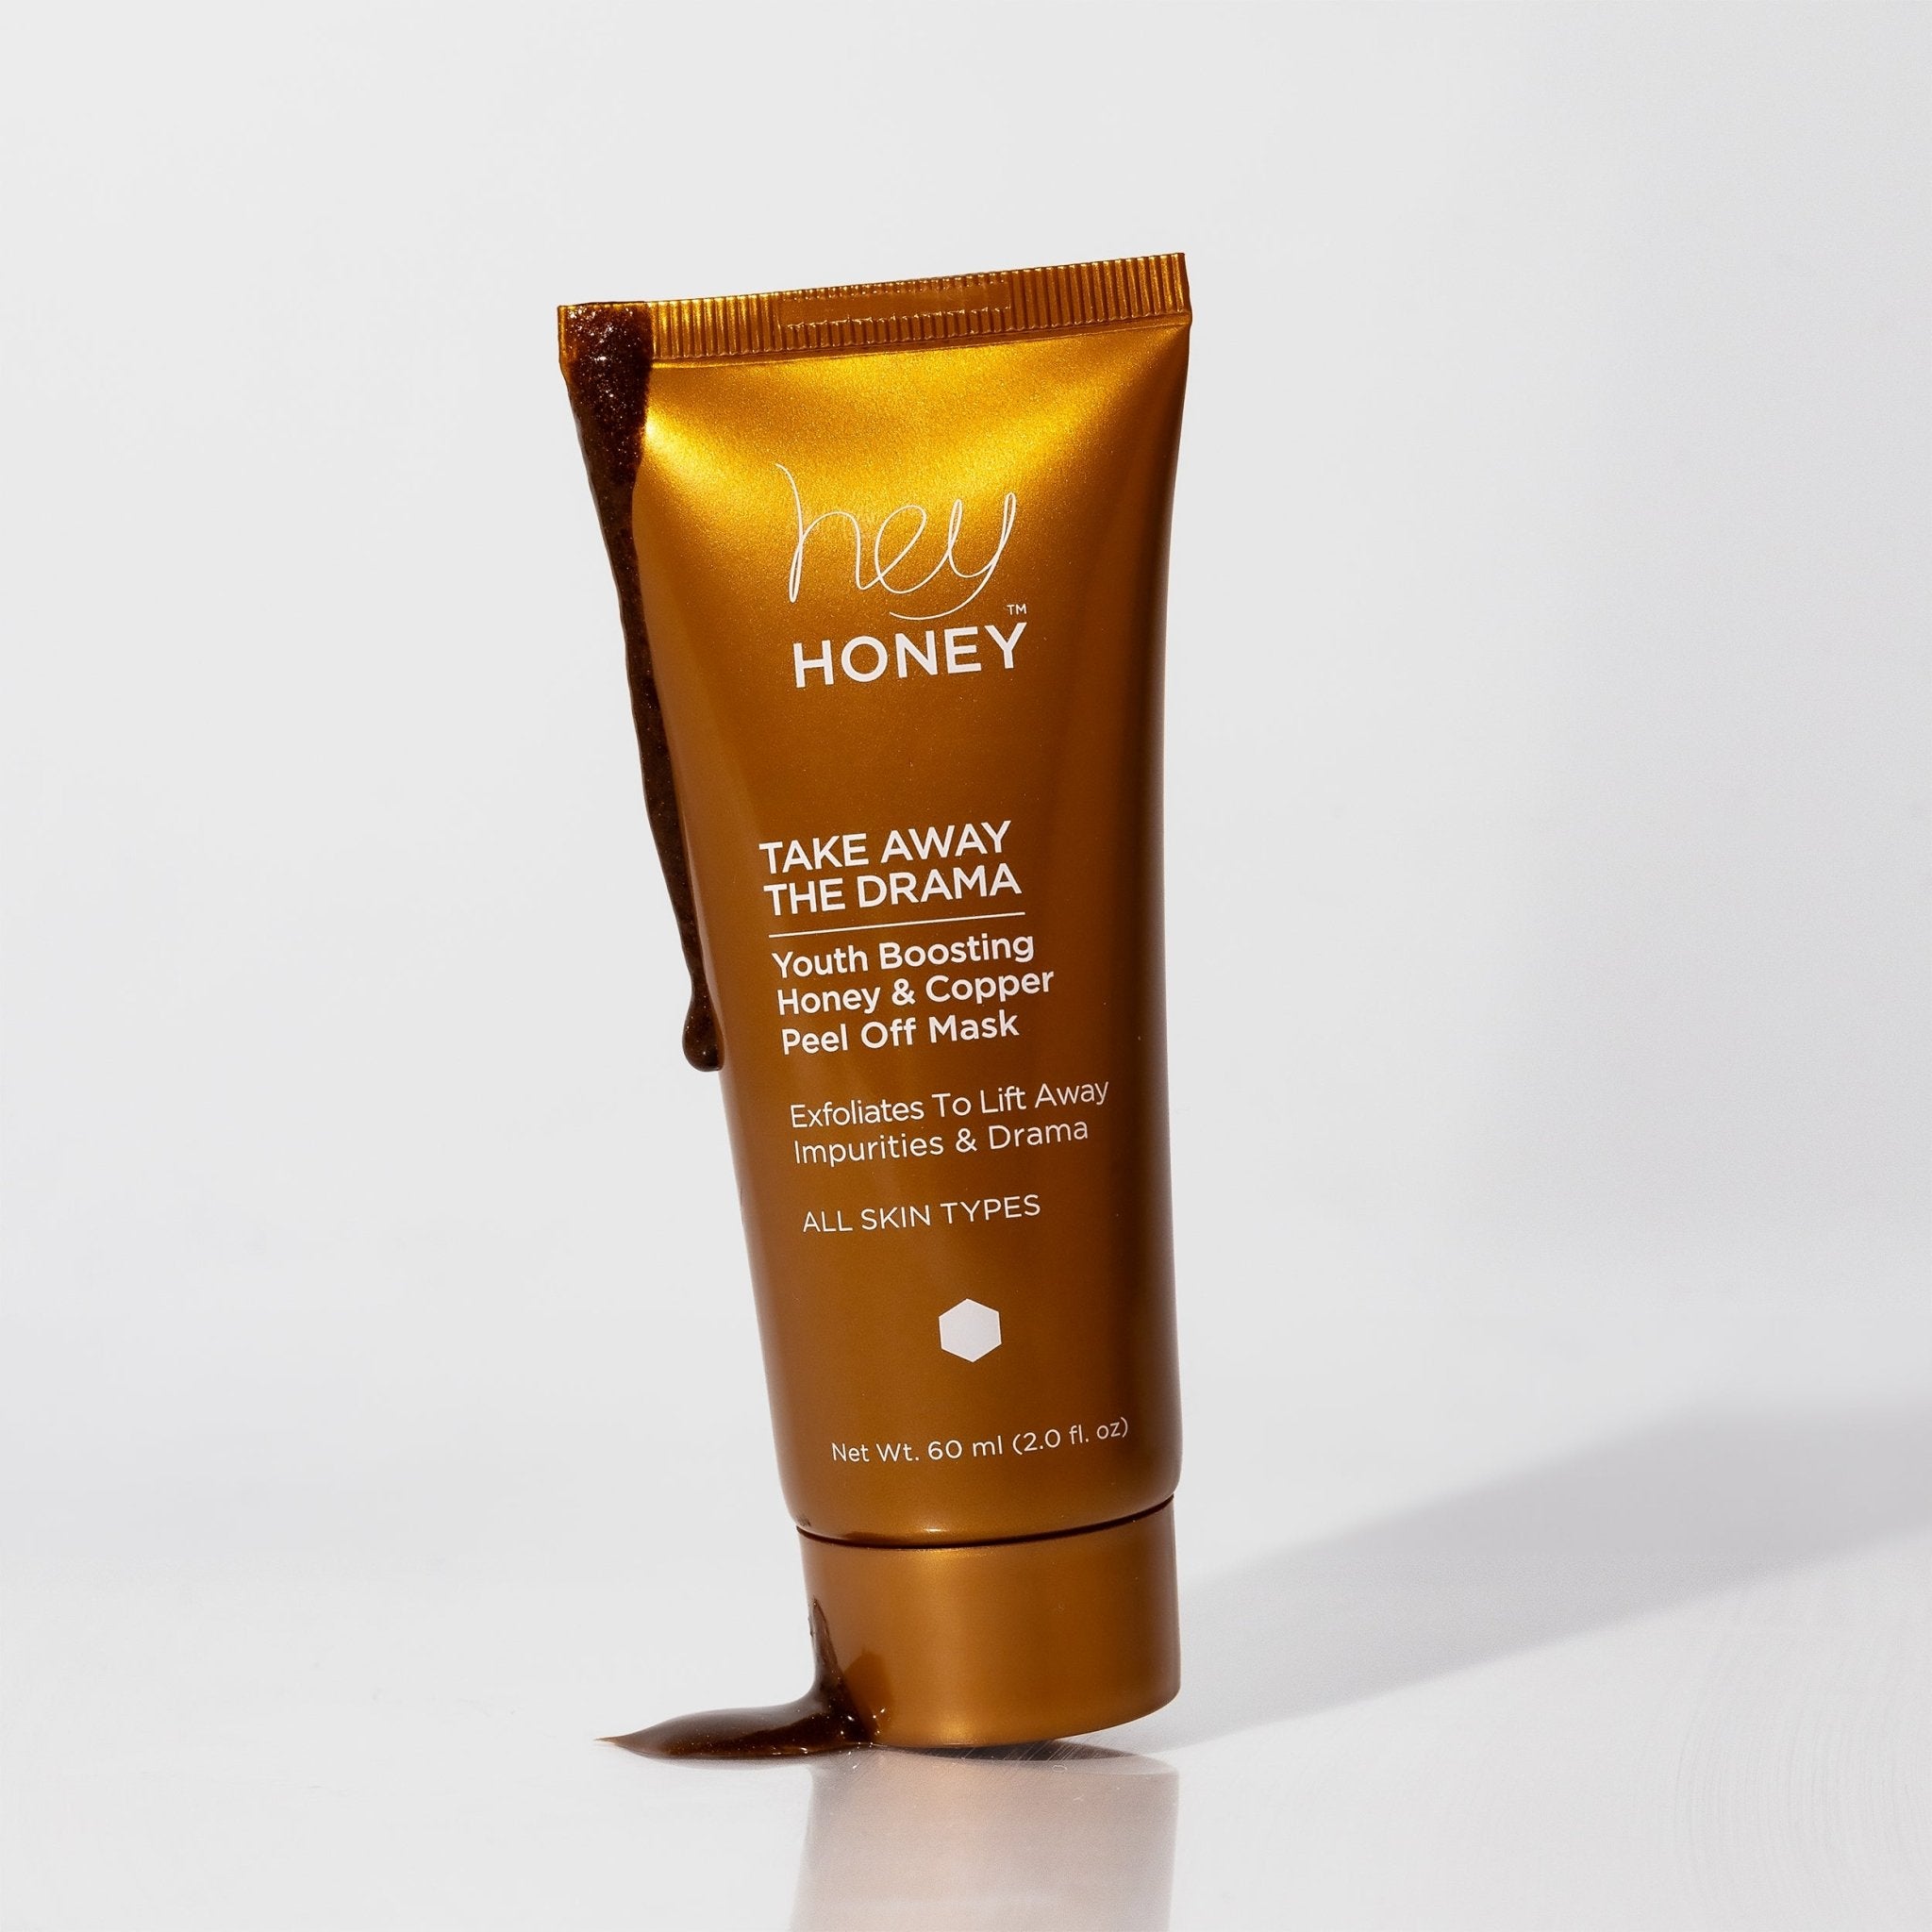 Hey Honey Skincare Take Away The Drama | Age Defying Honey & Copper  Exfoliating Peel-Off Facial | Anti-Fatigue & Elasticity Boost, All Skin  Types | 2